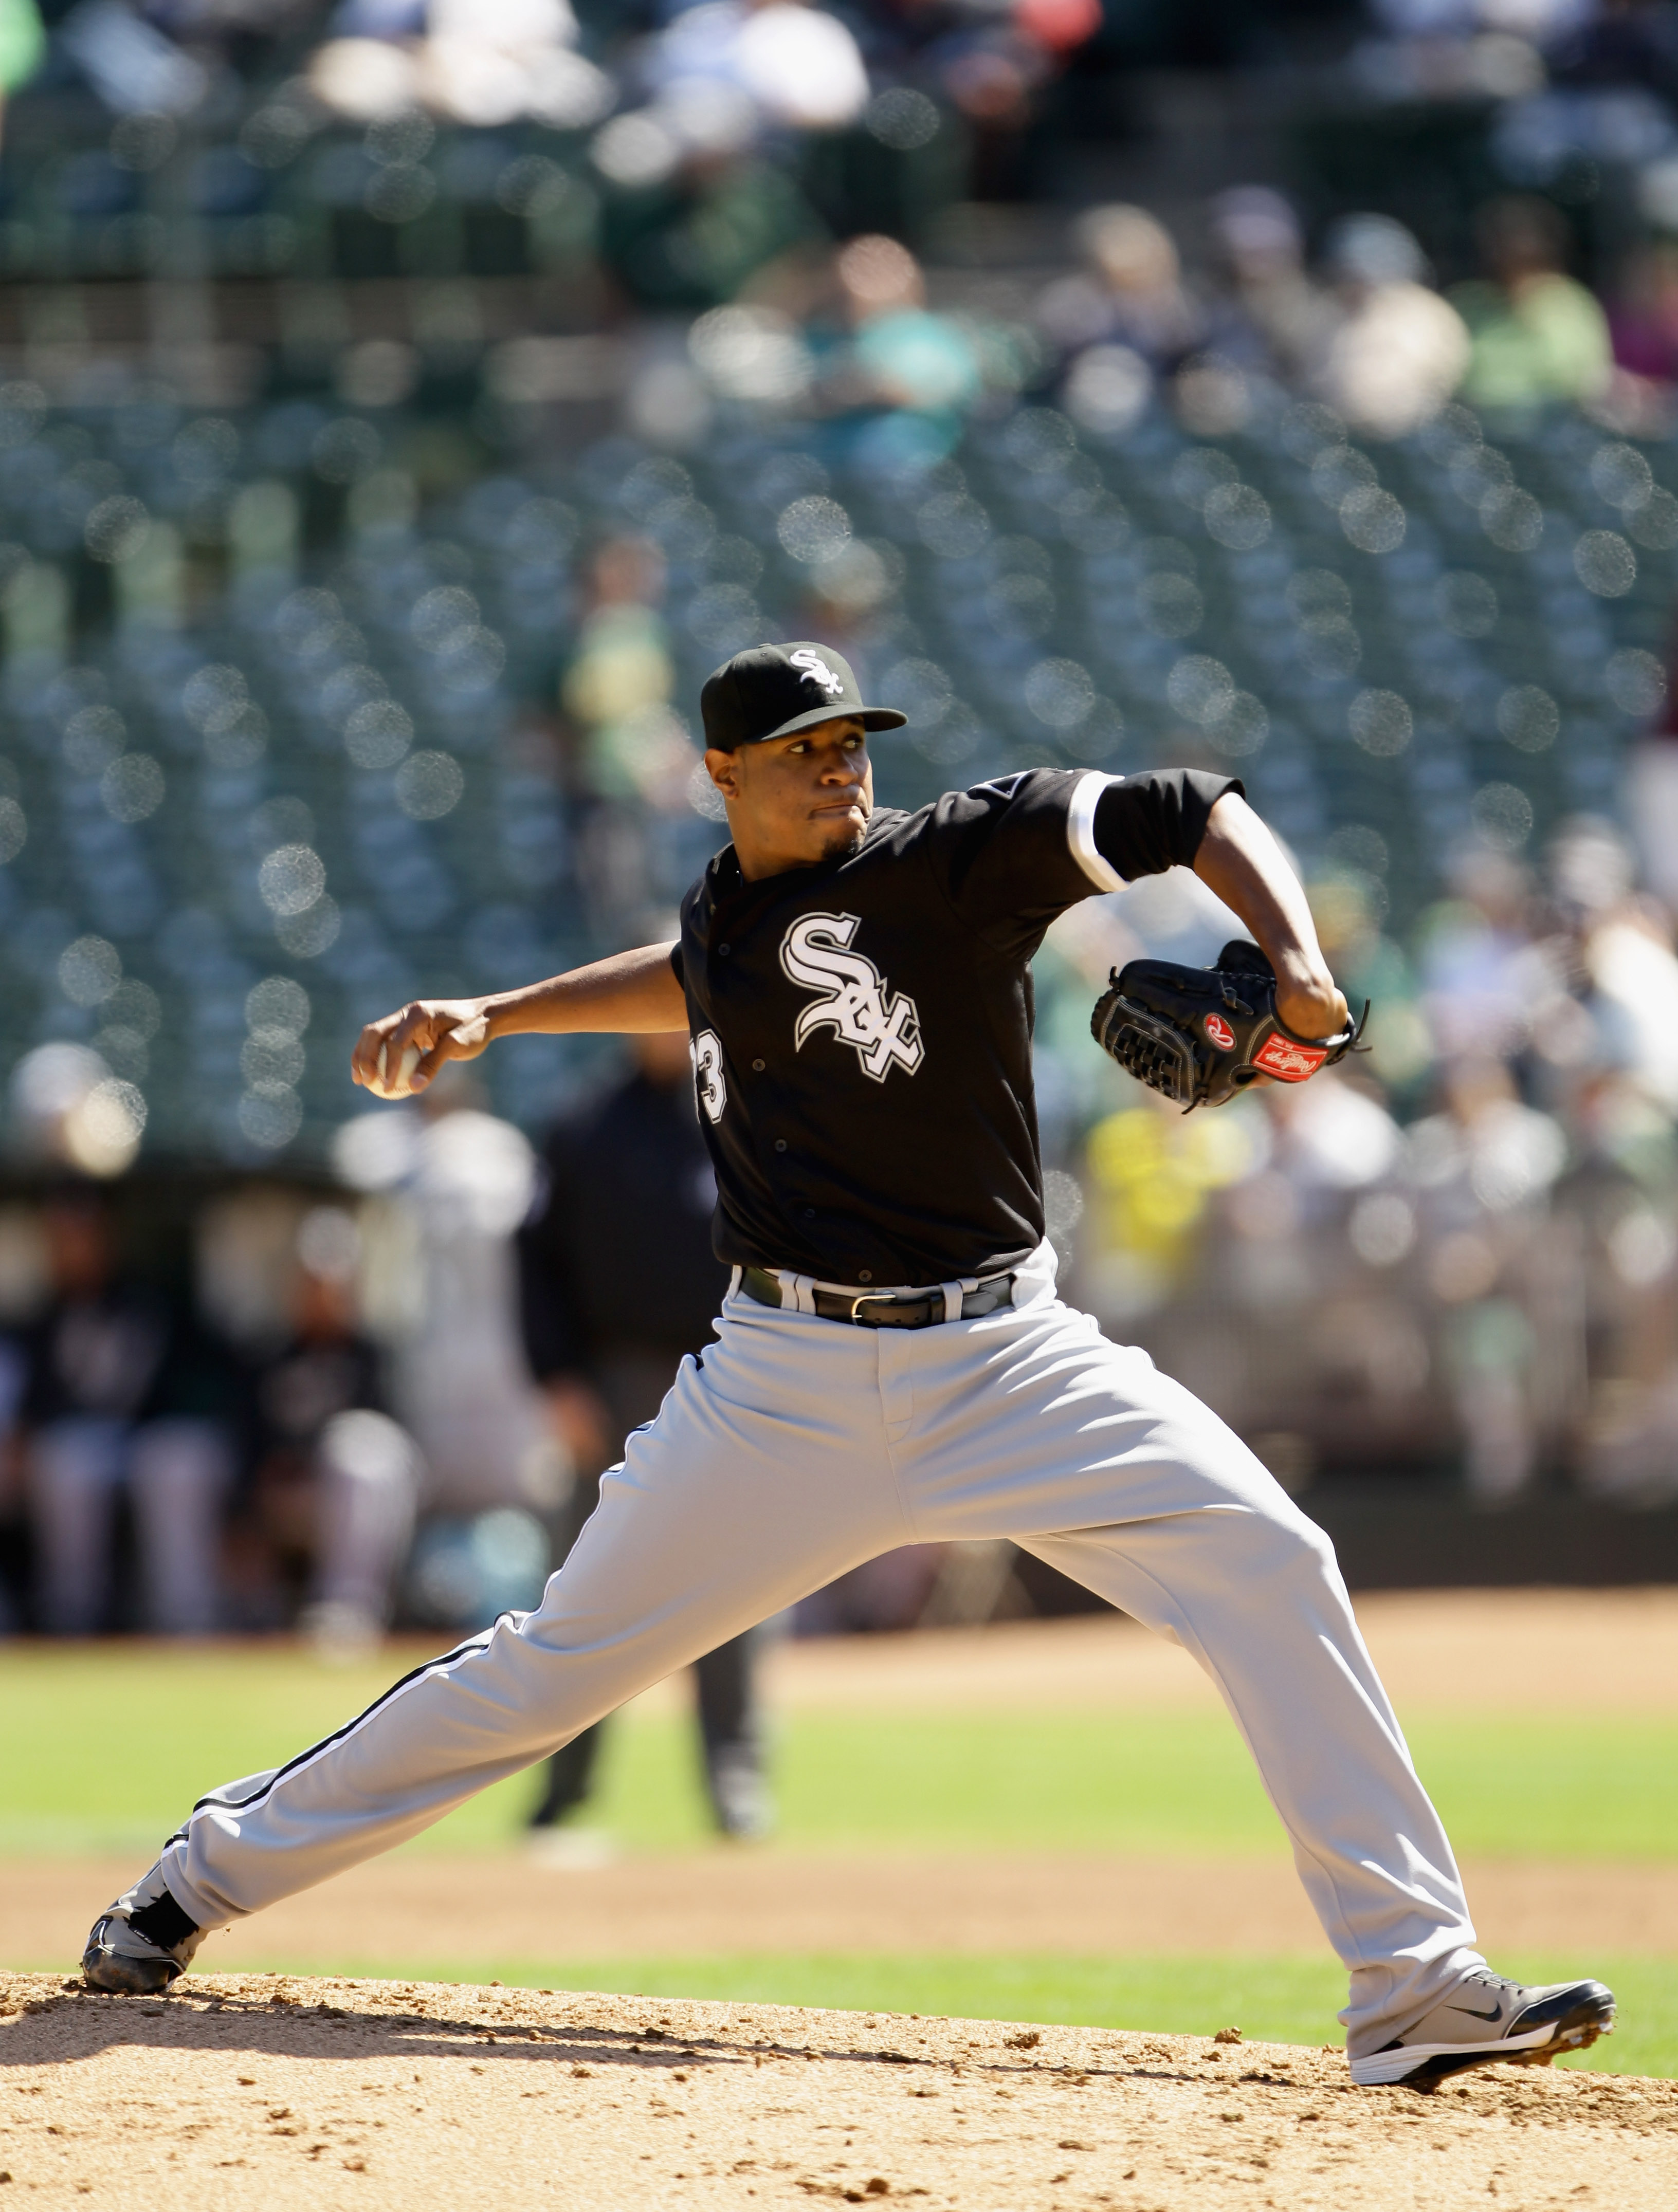 OAKLAND, CA - SEPTEMBER 22:  Edwin Jackson #33 of the Chicago White Sox pitches against the Oakland Athletics at the Oakland-Alameda County Coliseum on September 22, 2010 in Oakland, California.  (Photo by Ezra Shaw/Getty Images)